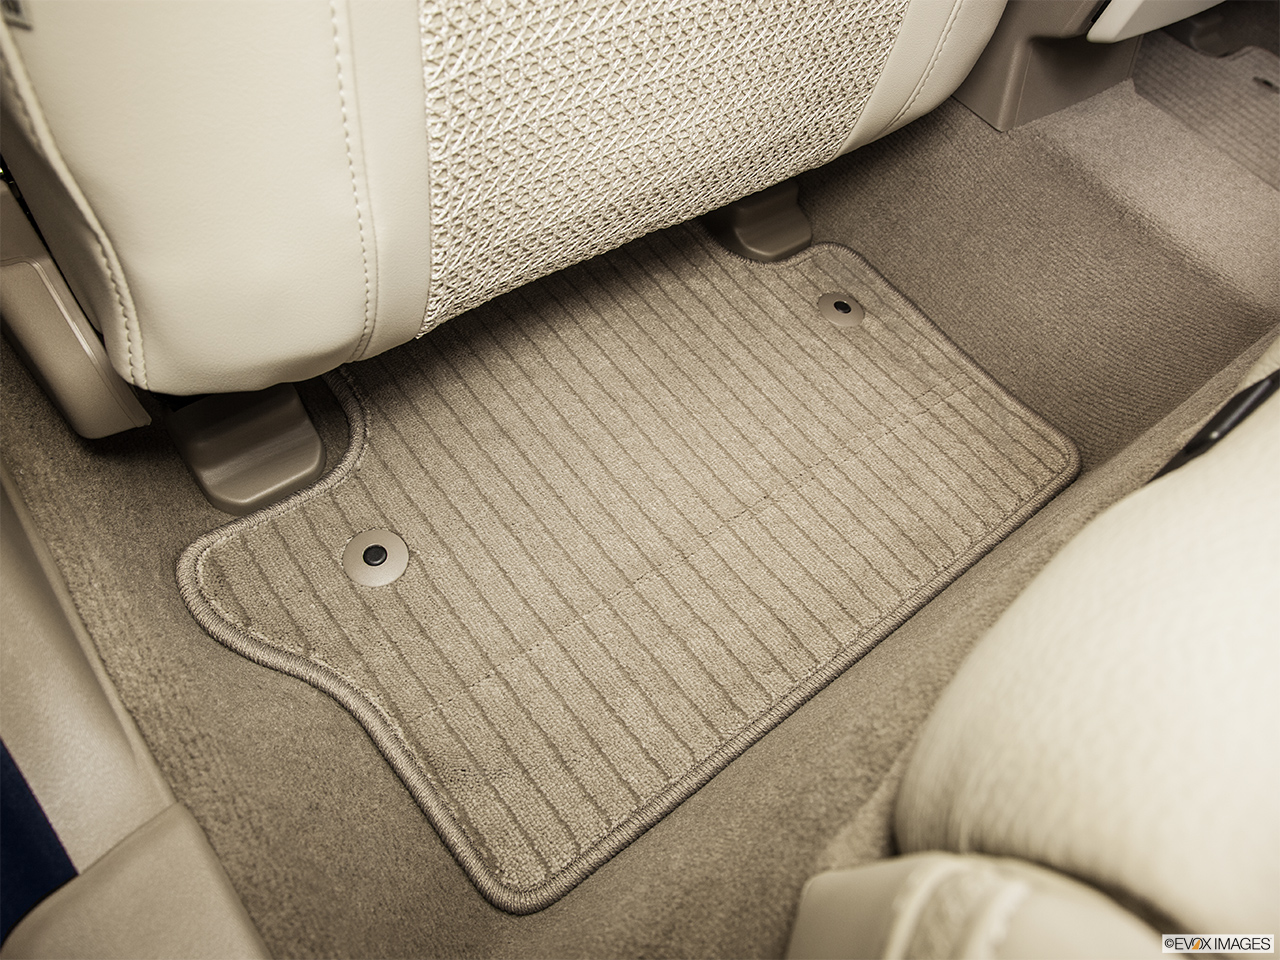 2015 Volvo XC70 Premier Plus Rear driver's side floor mat. Mid-seat level from outside looking in. 